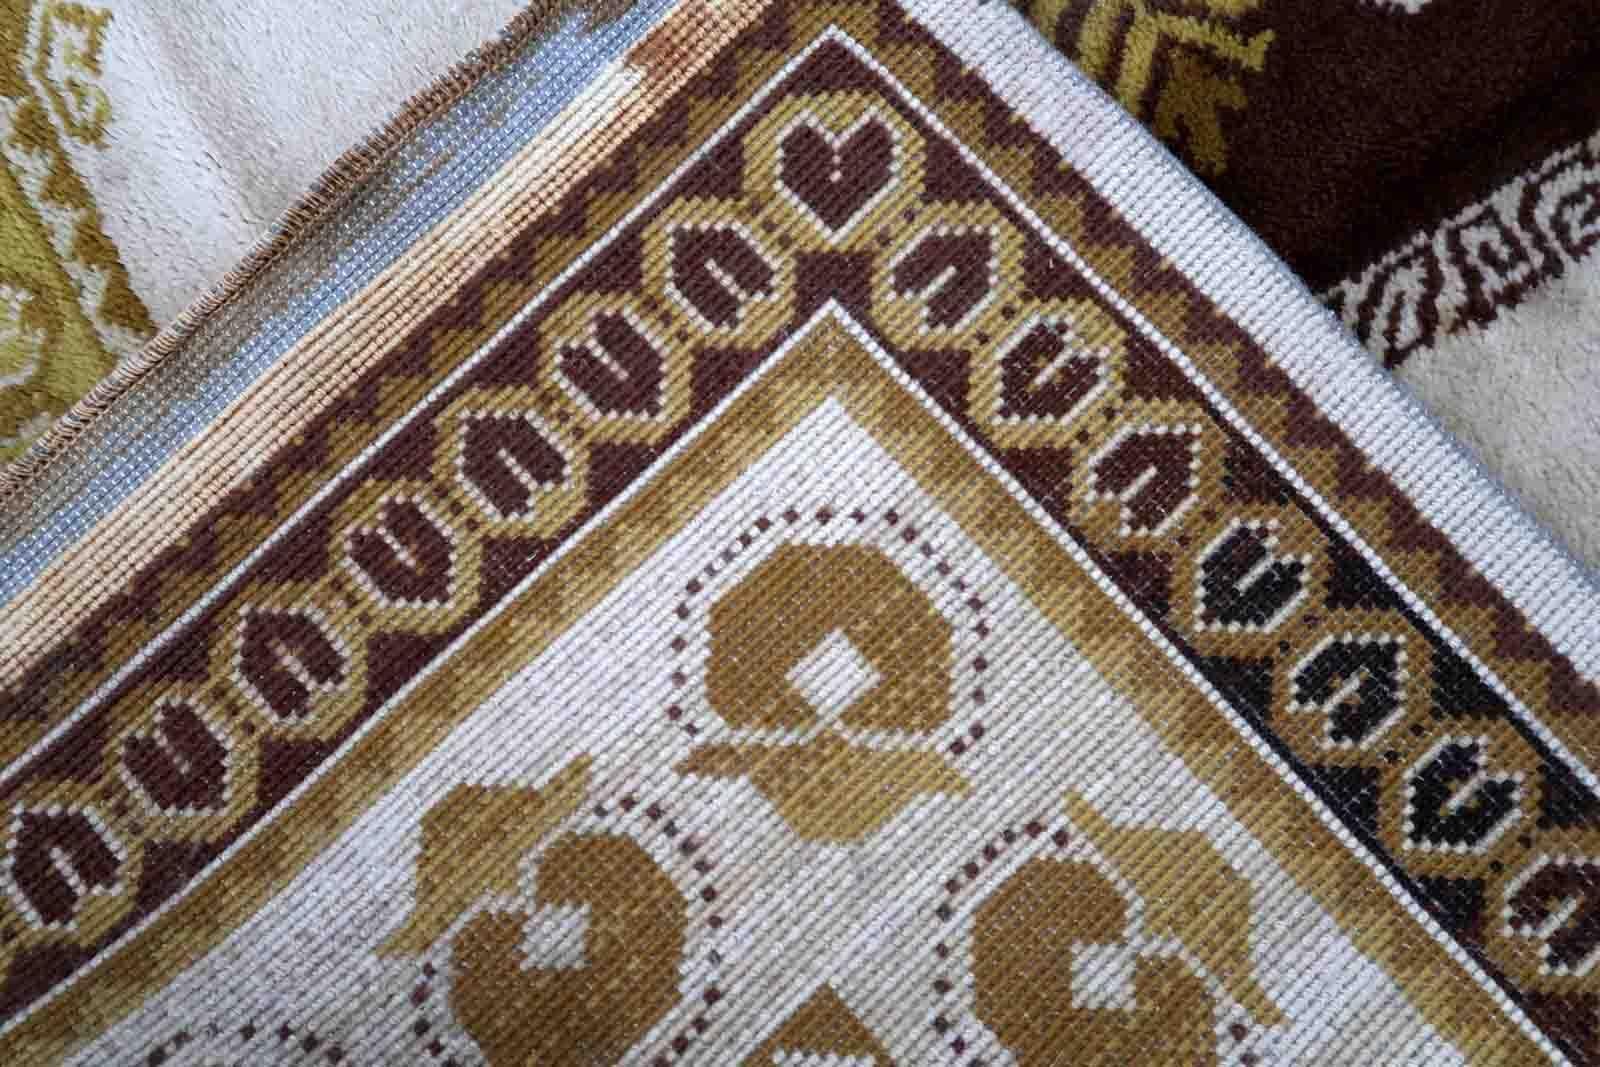 Vintage French Savonnerie rug in beige, brown and golden shades. The rug is from the middle of 20th century in original good condition.

-condition: original good,

-circa: 1950s,

-size: 7.9' x 11.4' (242cm x 349cm),

-material: